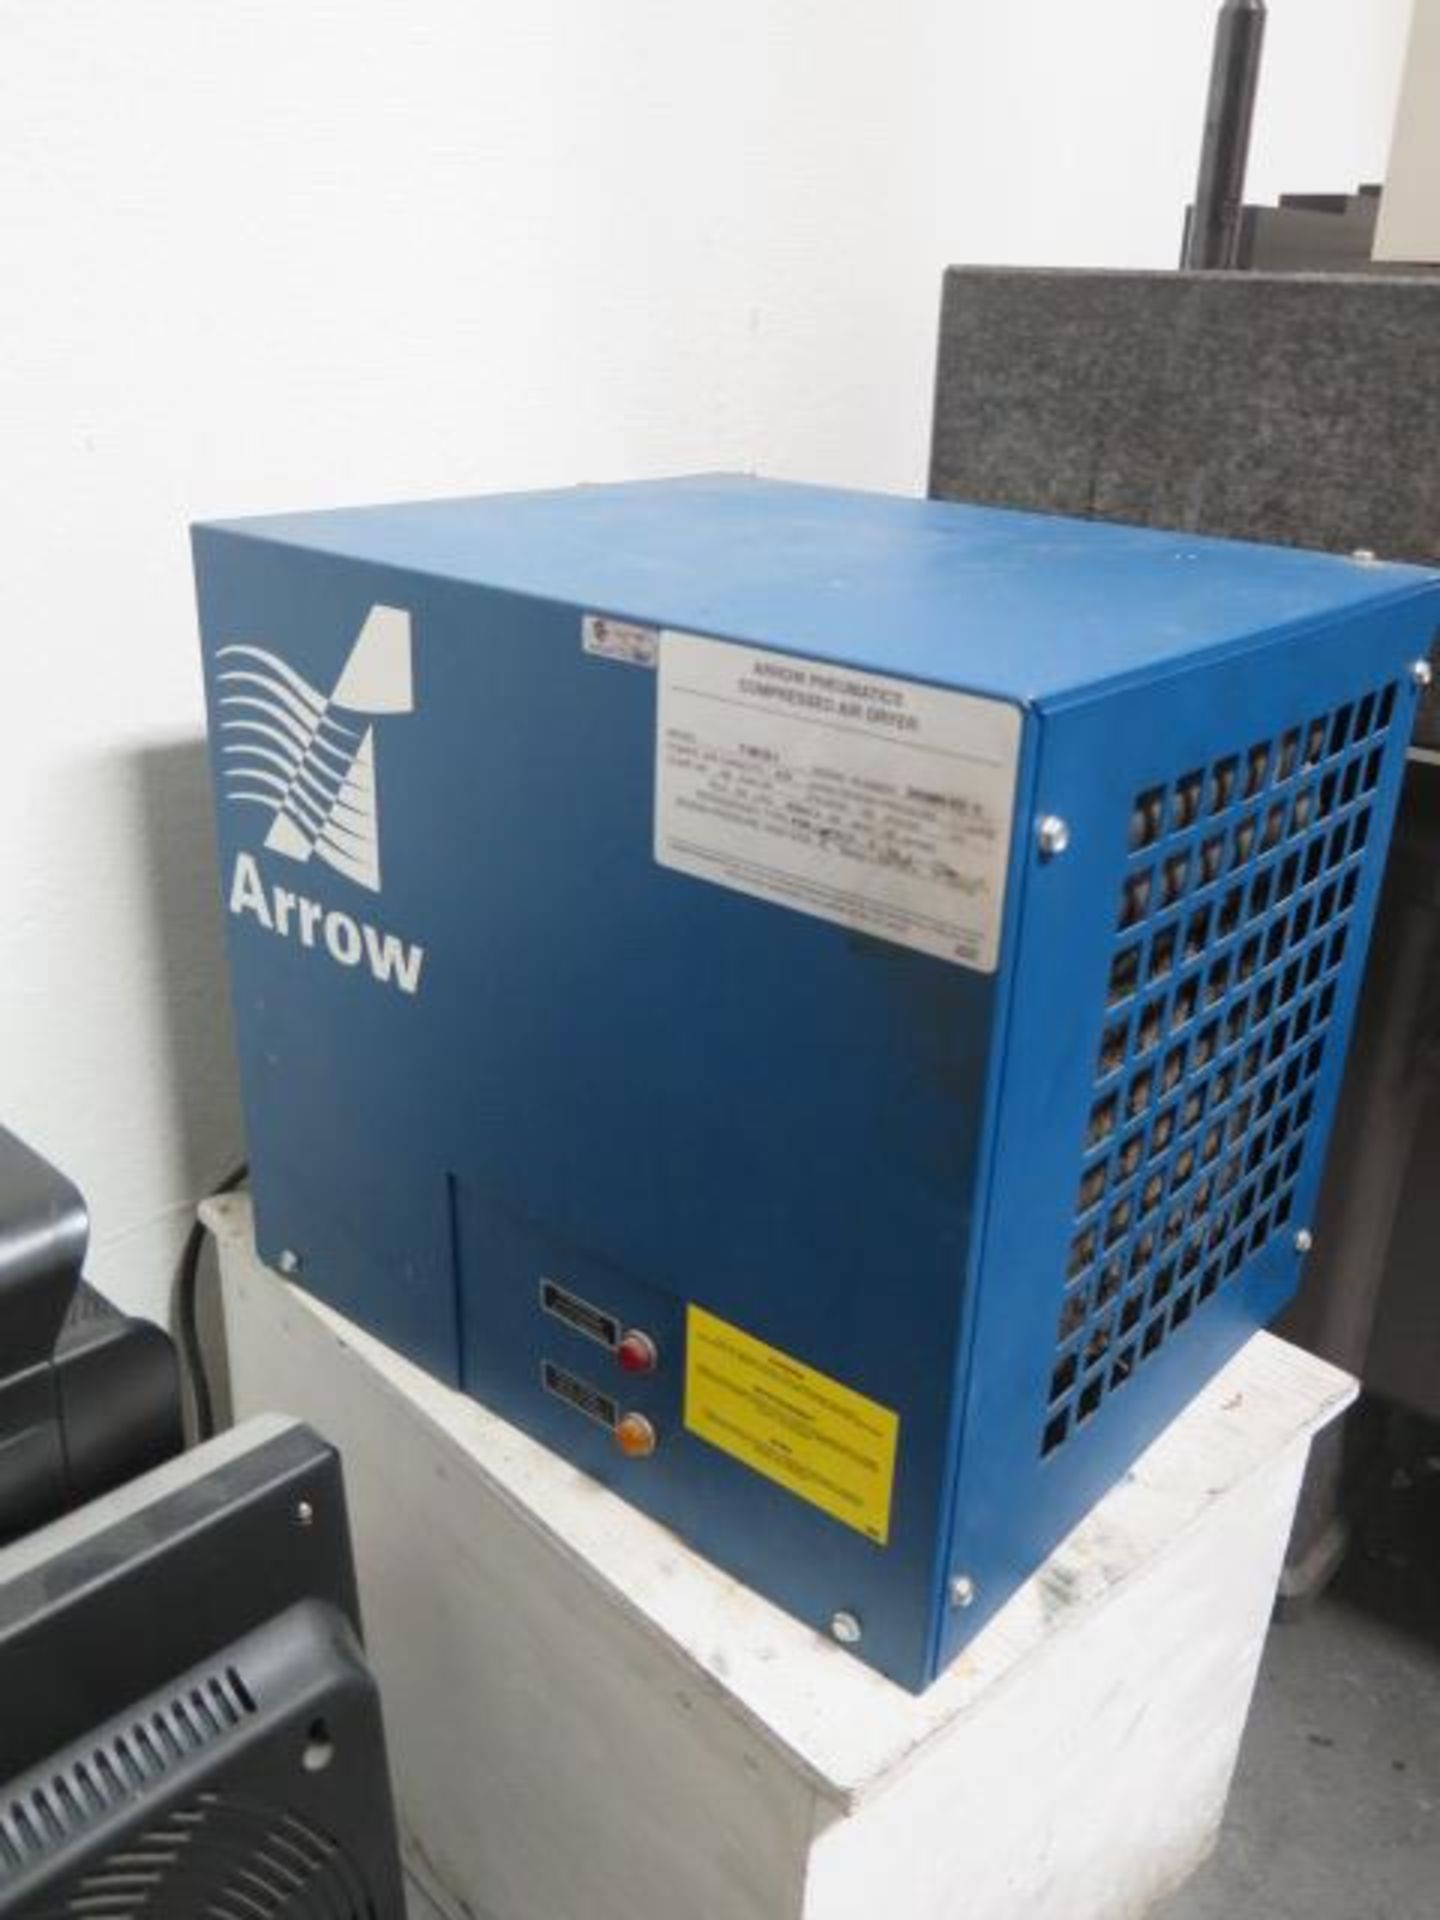 Mitutoyo BH706 CMM Machine s/n 0393507-004107111 w/ Renishaw PH-1 Probe, QC5000 Software, SOLD AS IS - Image 12 of 14